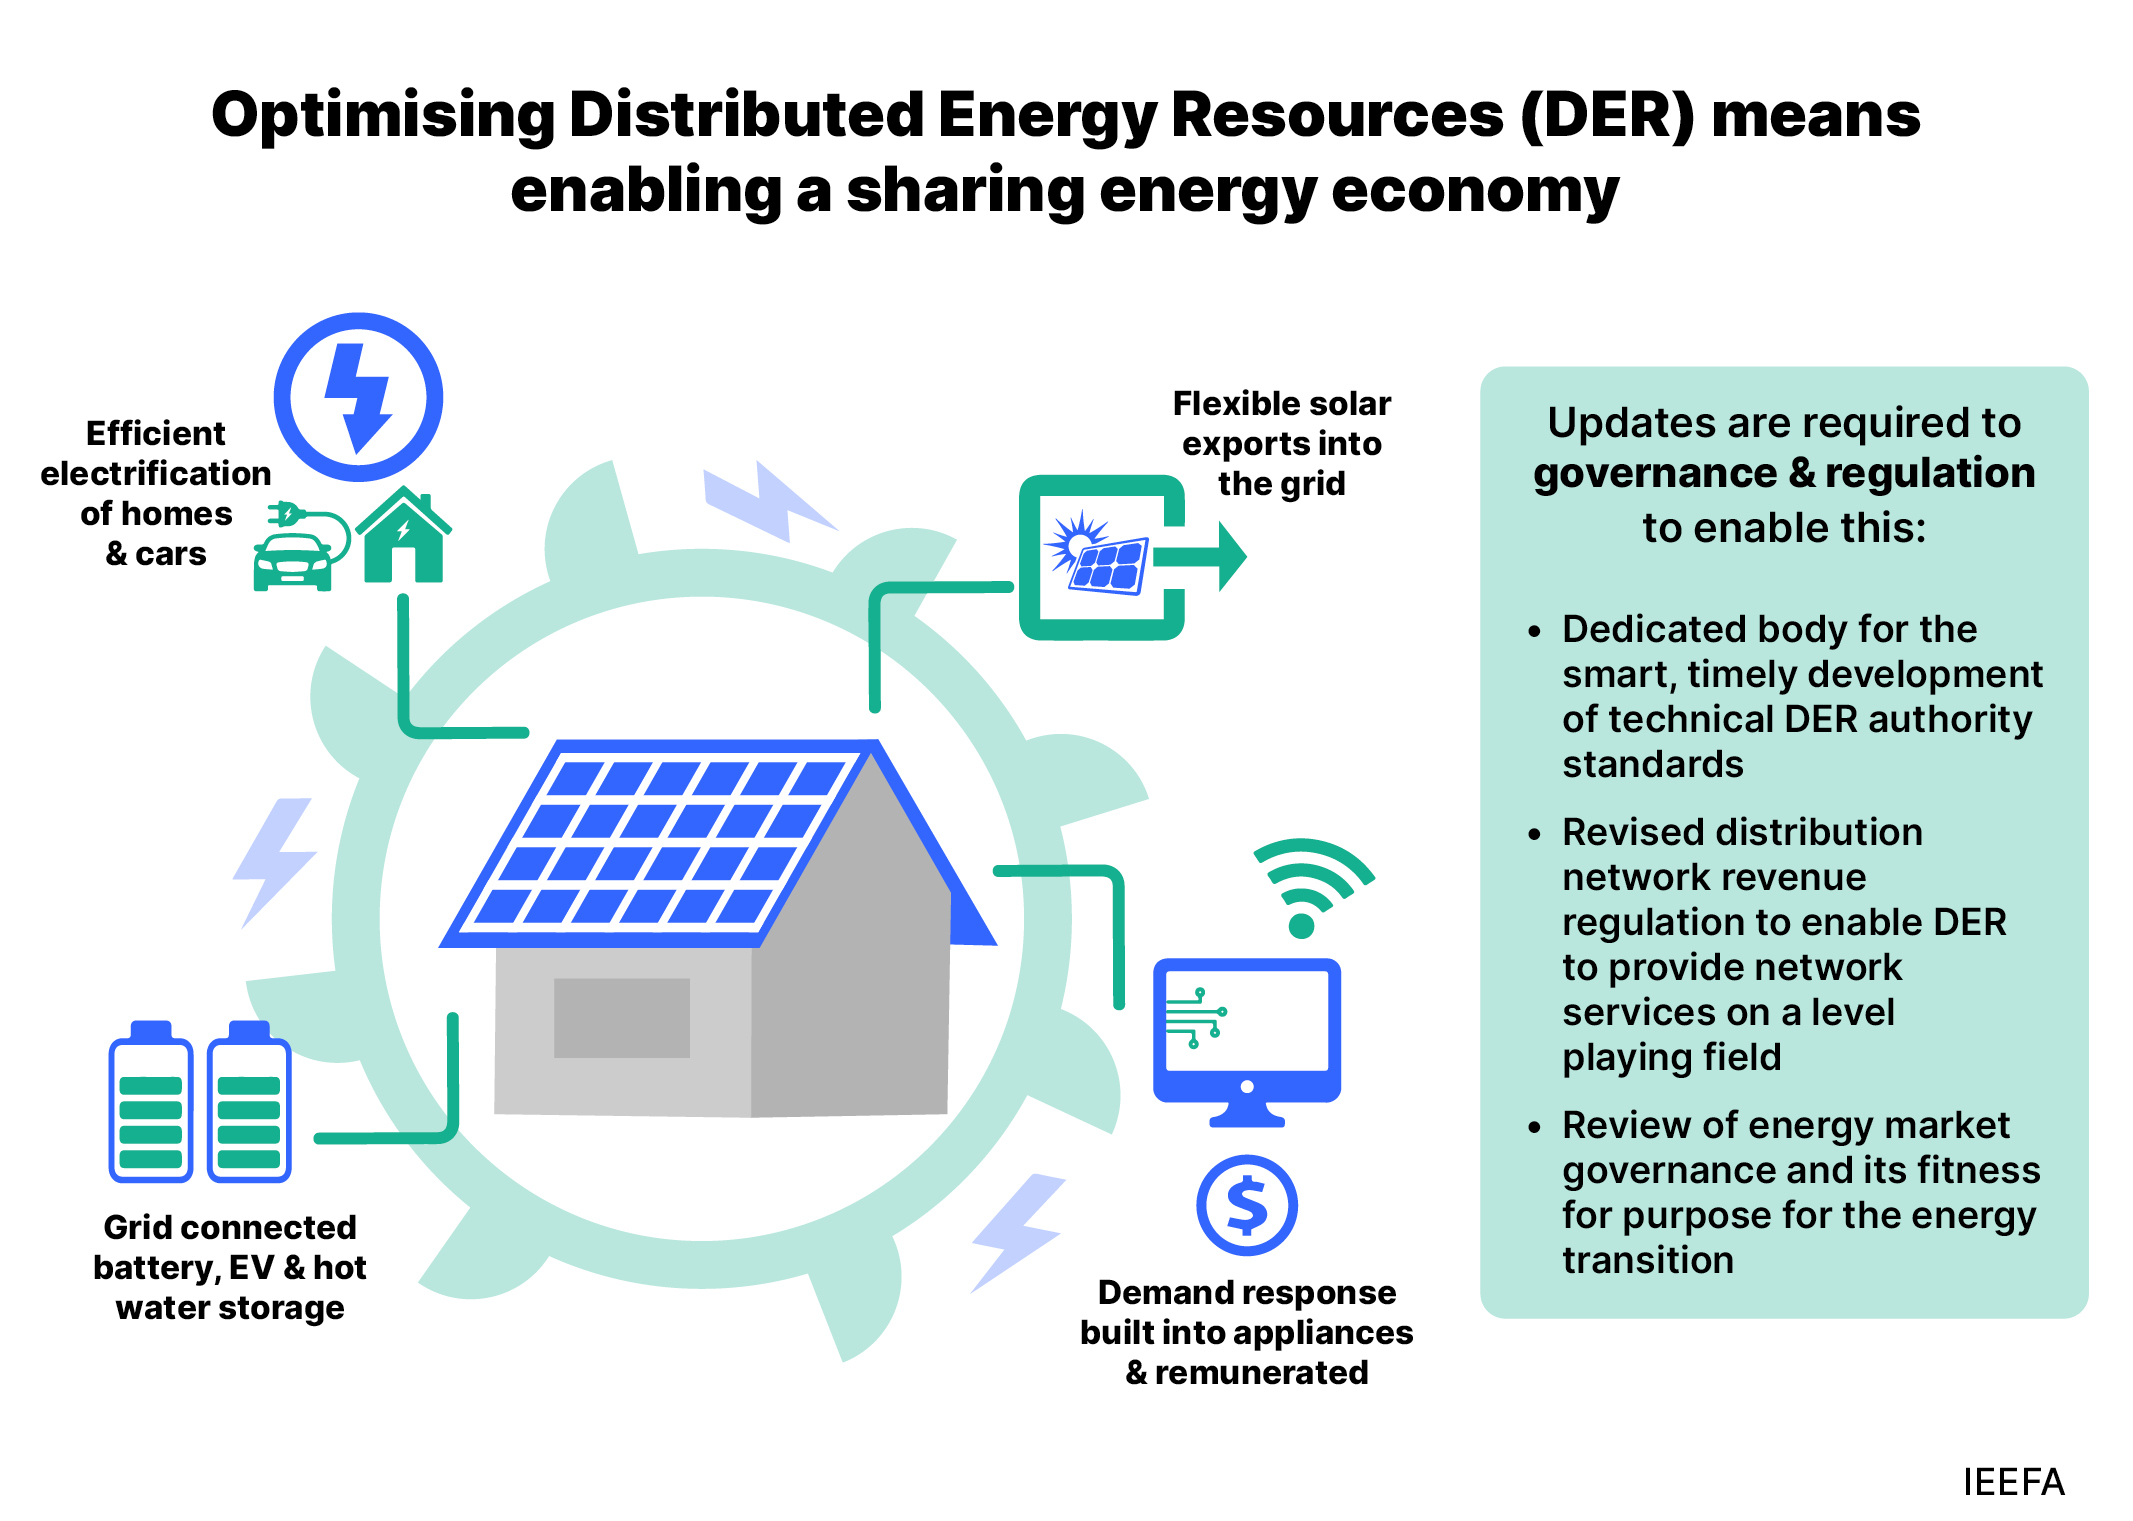 Optimising DER to enable a sharing energy economy